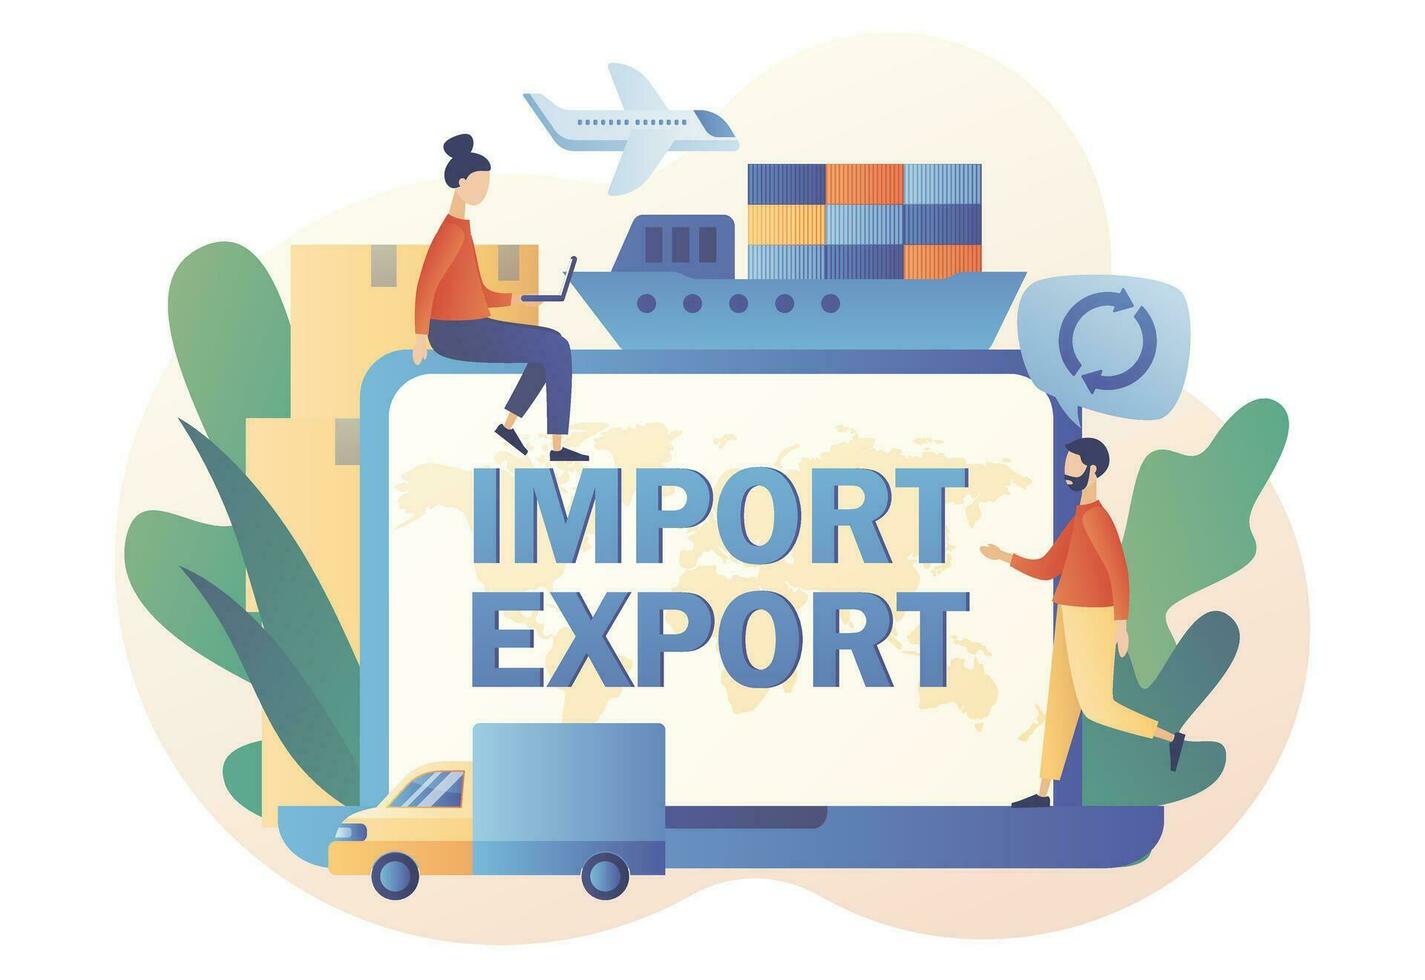 Online logistics business. Import and export - text on laptop screen. Global trade. Tiny people sale goods and services worldwide. Modern flat cartoon style. Vector illustration on white background